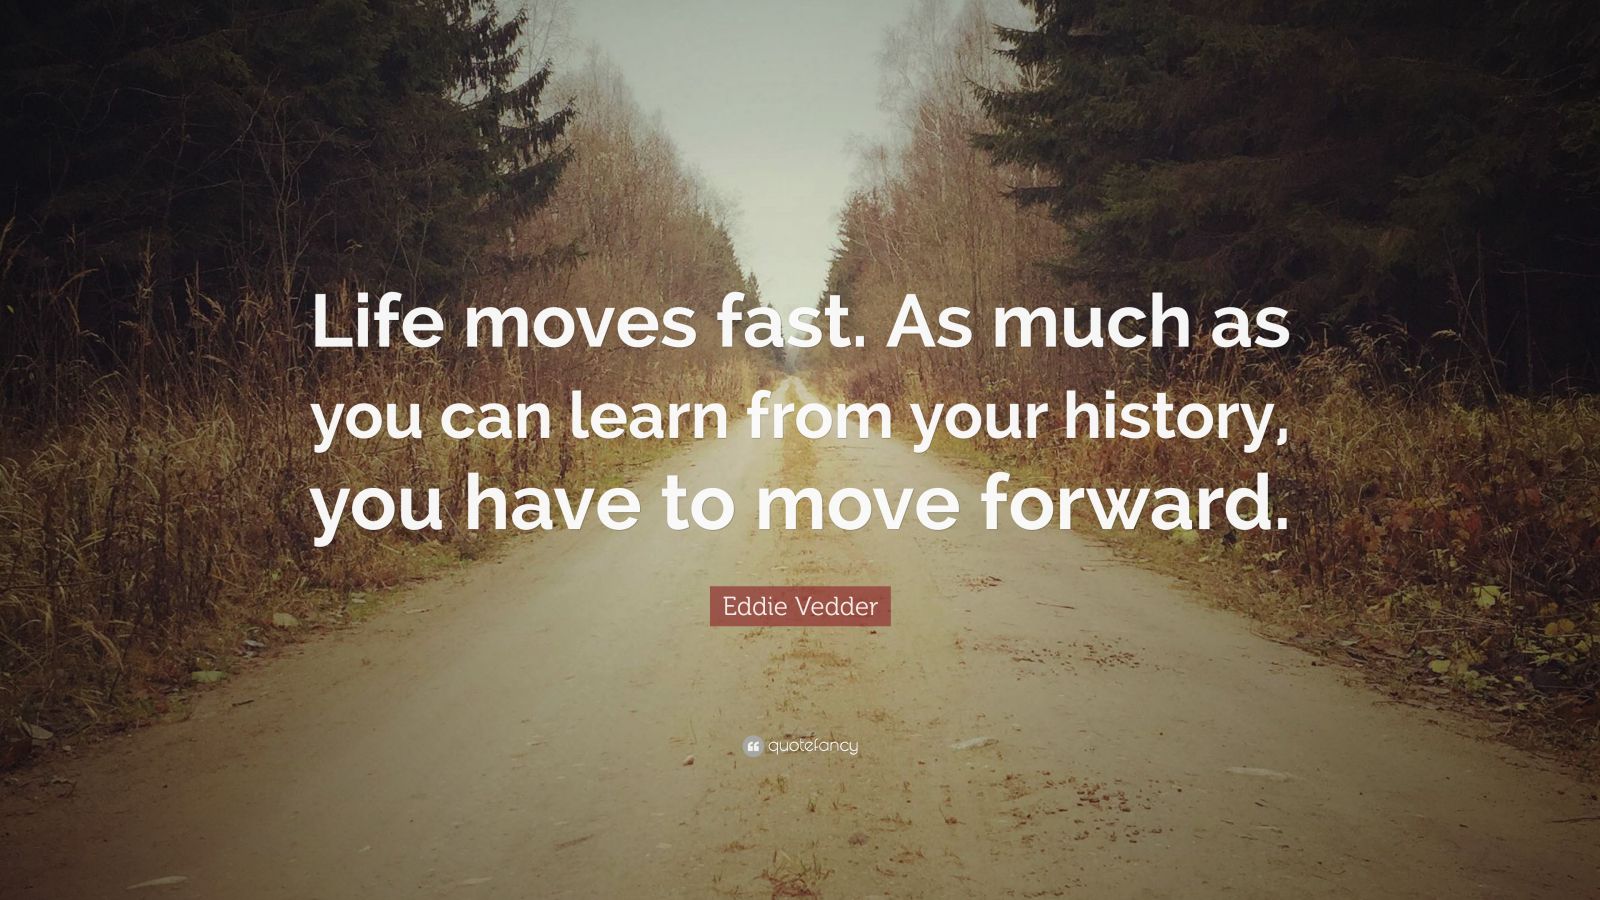 Eddie Vedder Quote “Life moves fast. As much as you can learn from